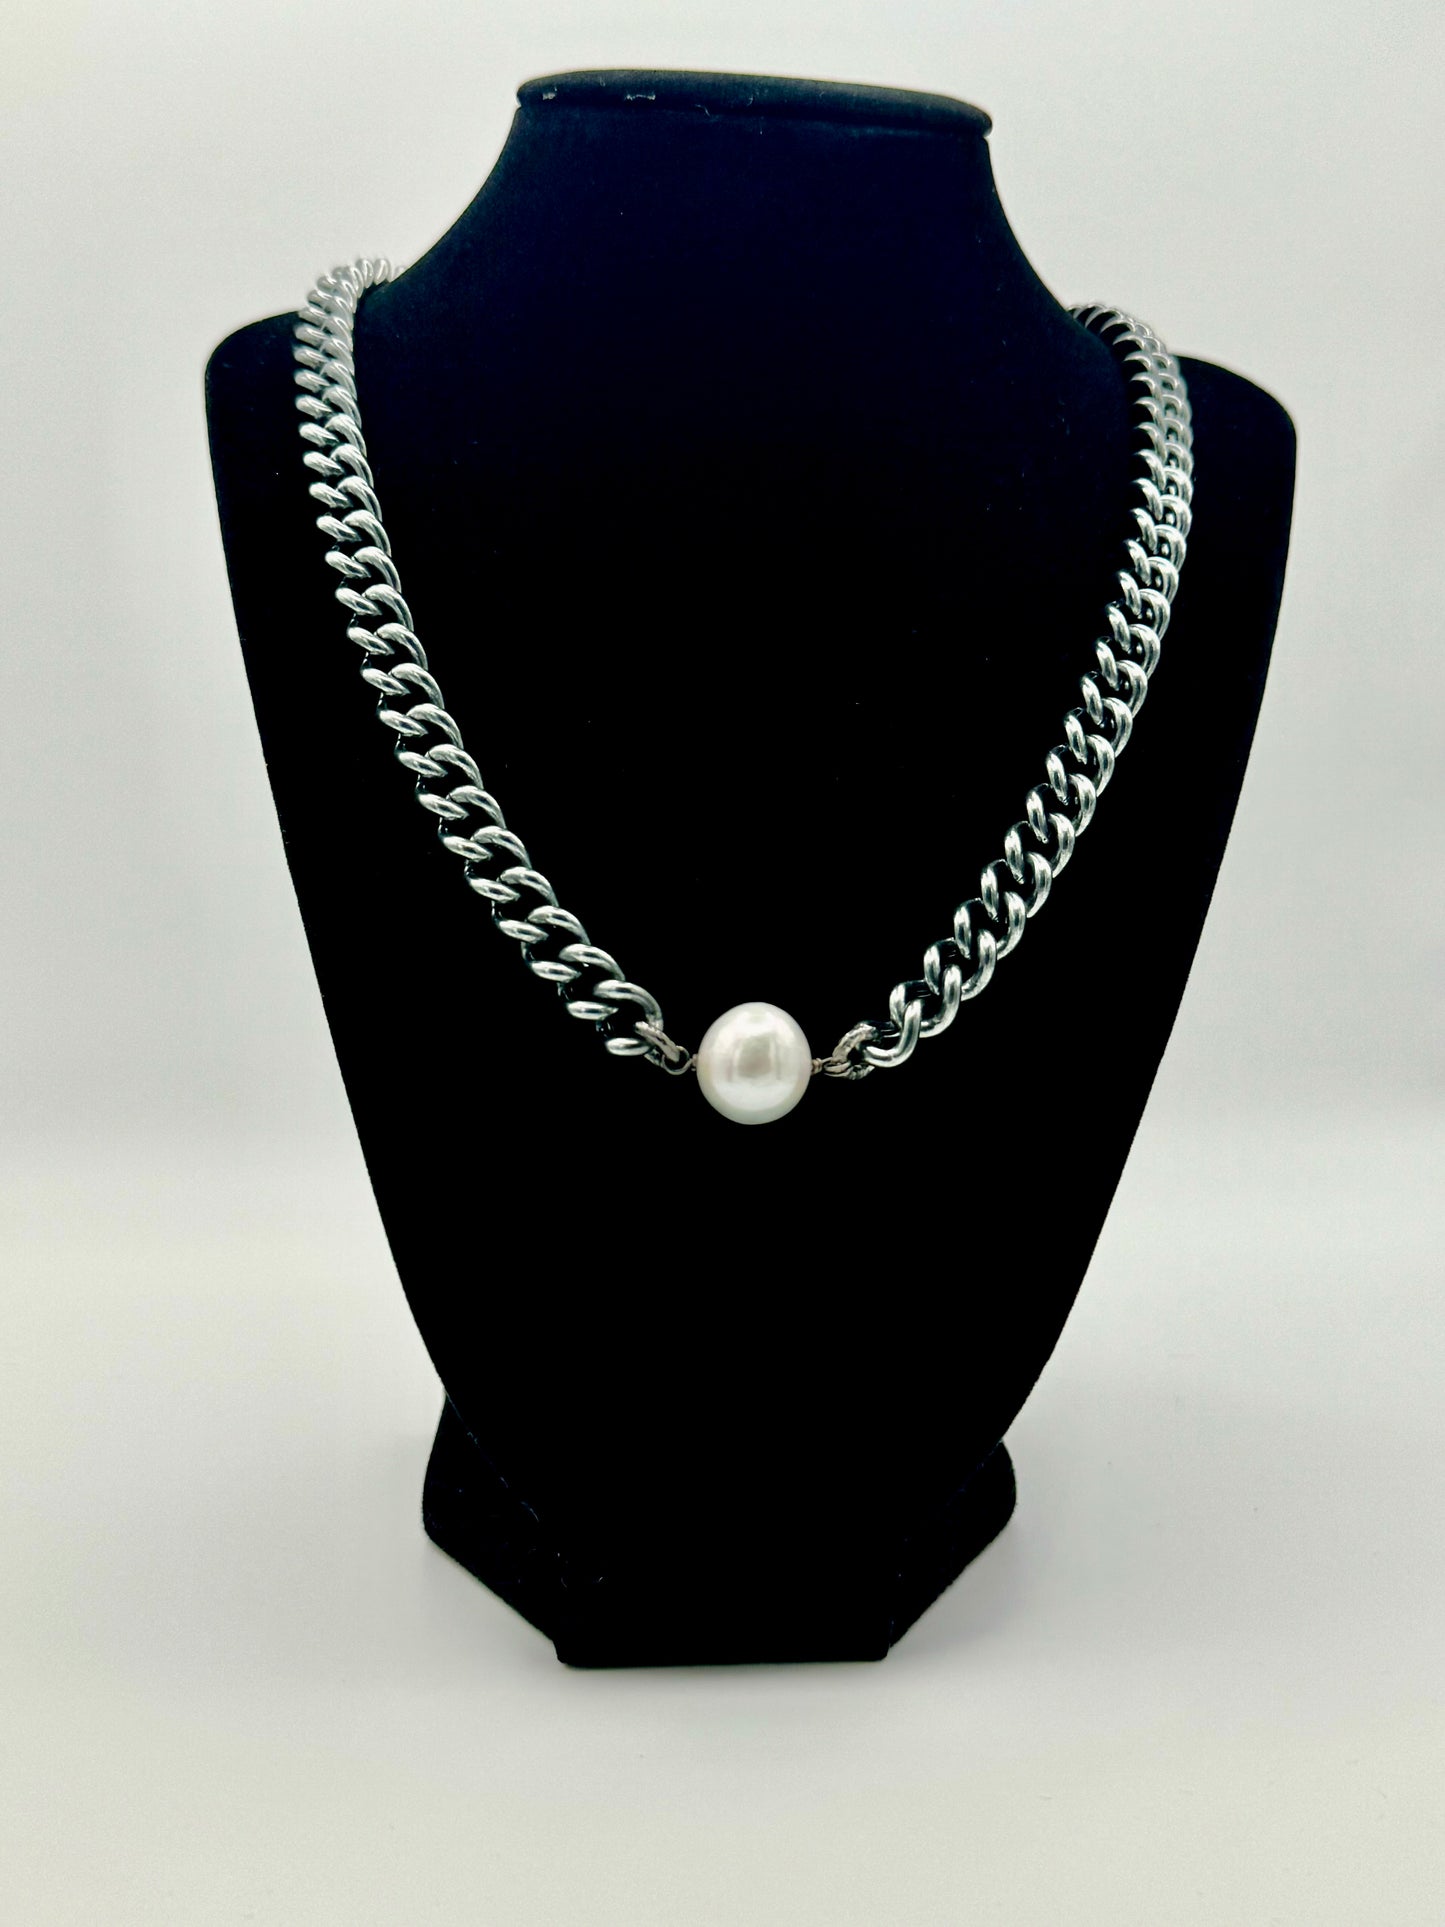 White Edison Curb Link Chain Necklace